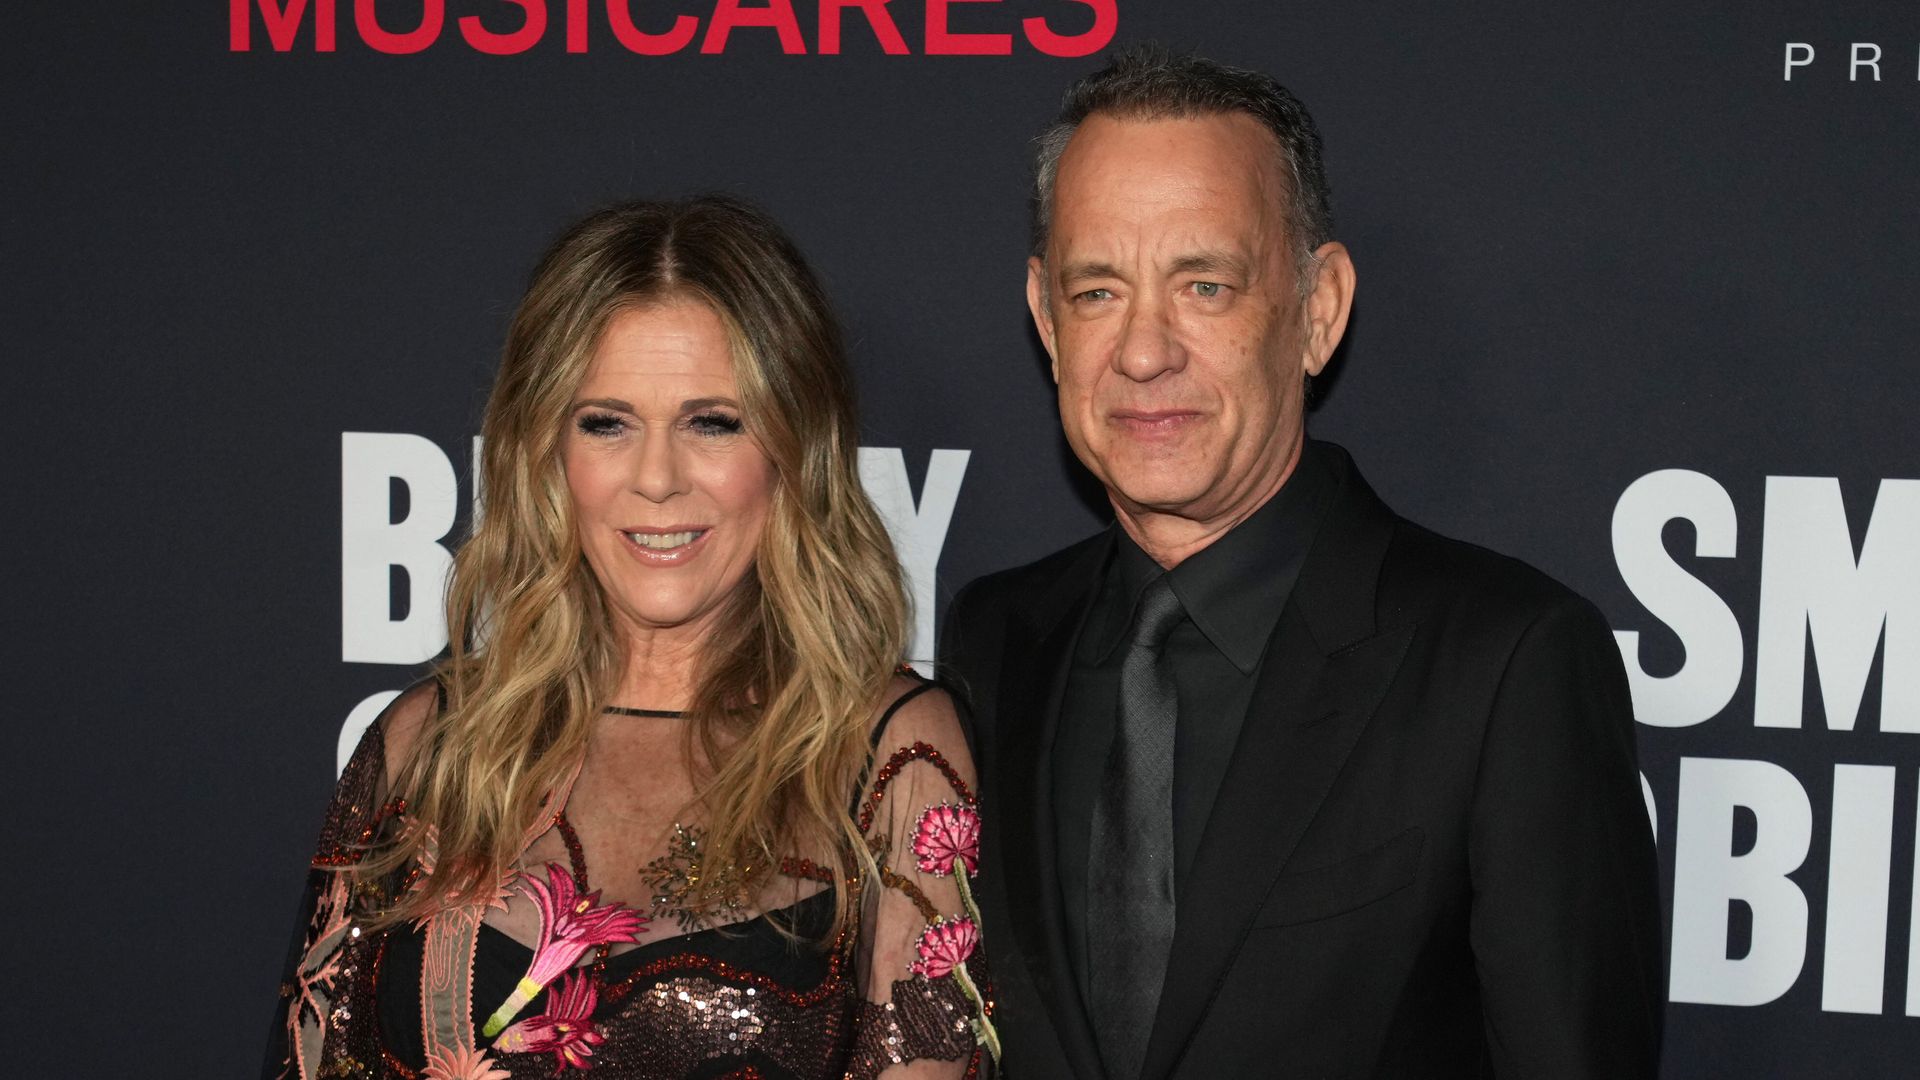 Rita Wilson and Tom Hanks attend the 2023 MusiCares Persons Of The Year honoring Berry Gordy and Smokey Robinson at Los Angeles Convention Center on February 03, 2023 in Los Angeles, California